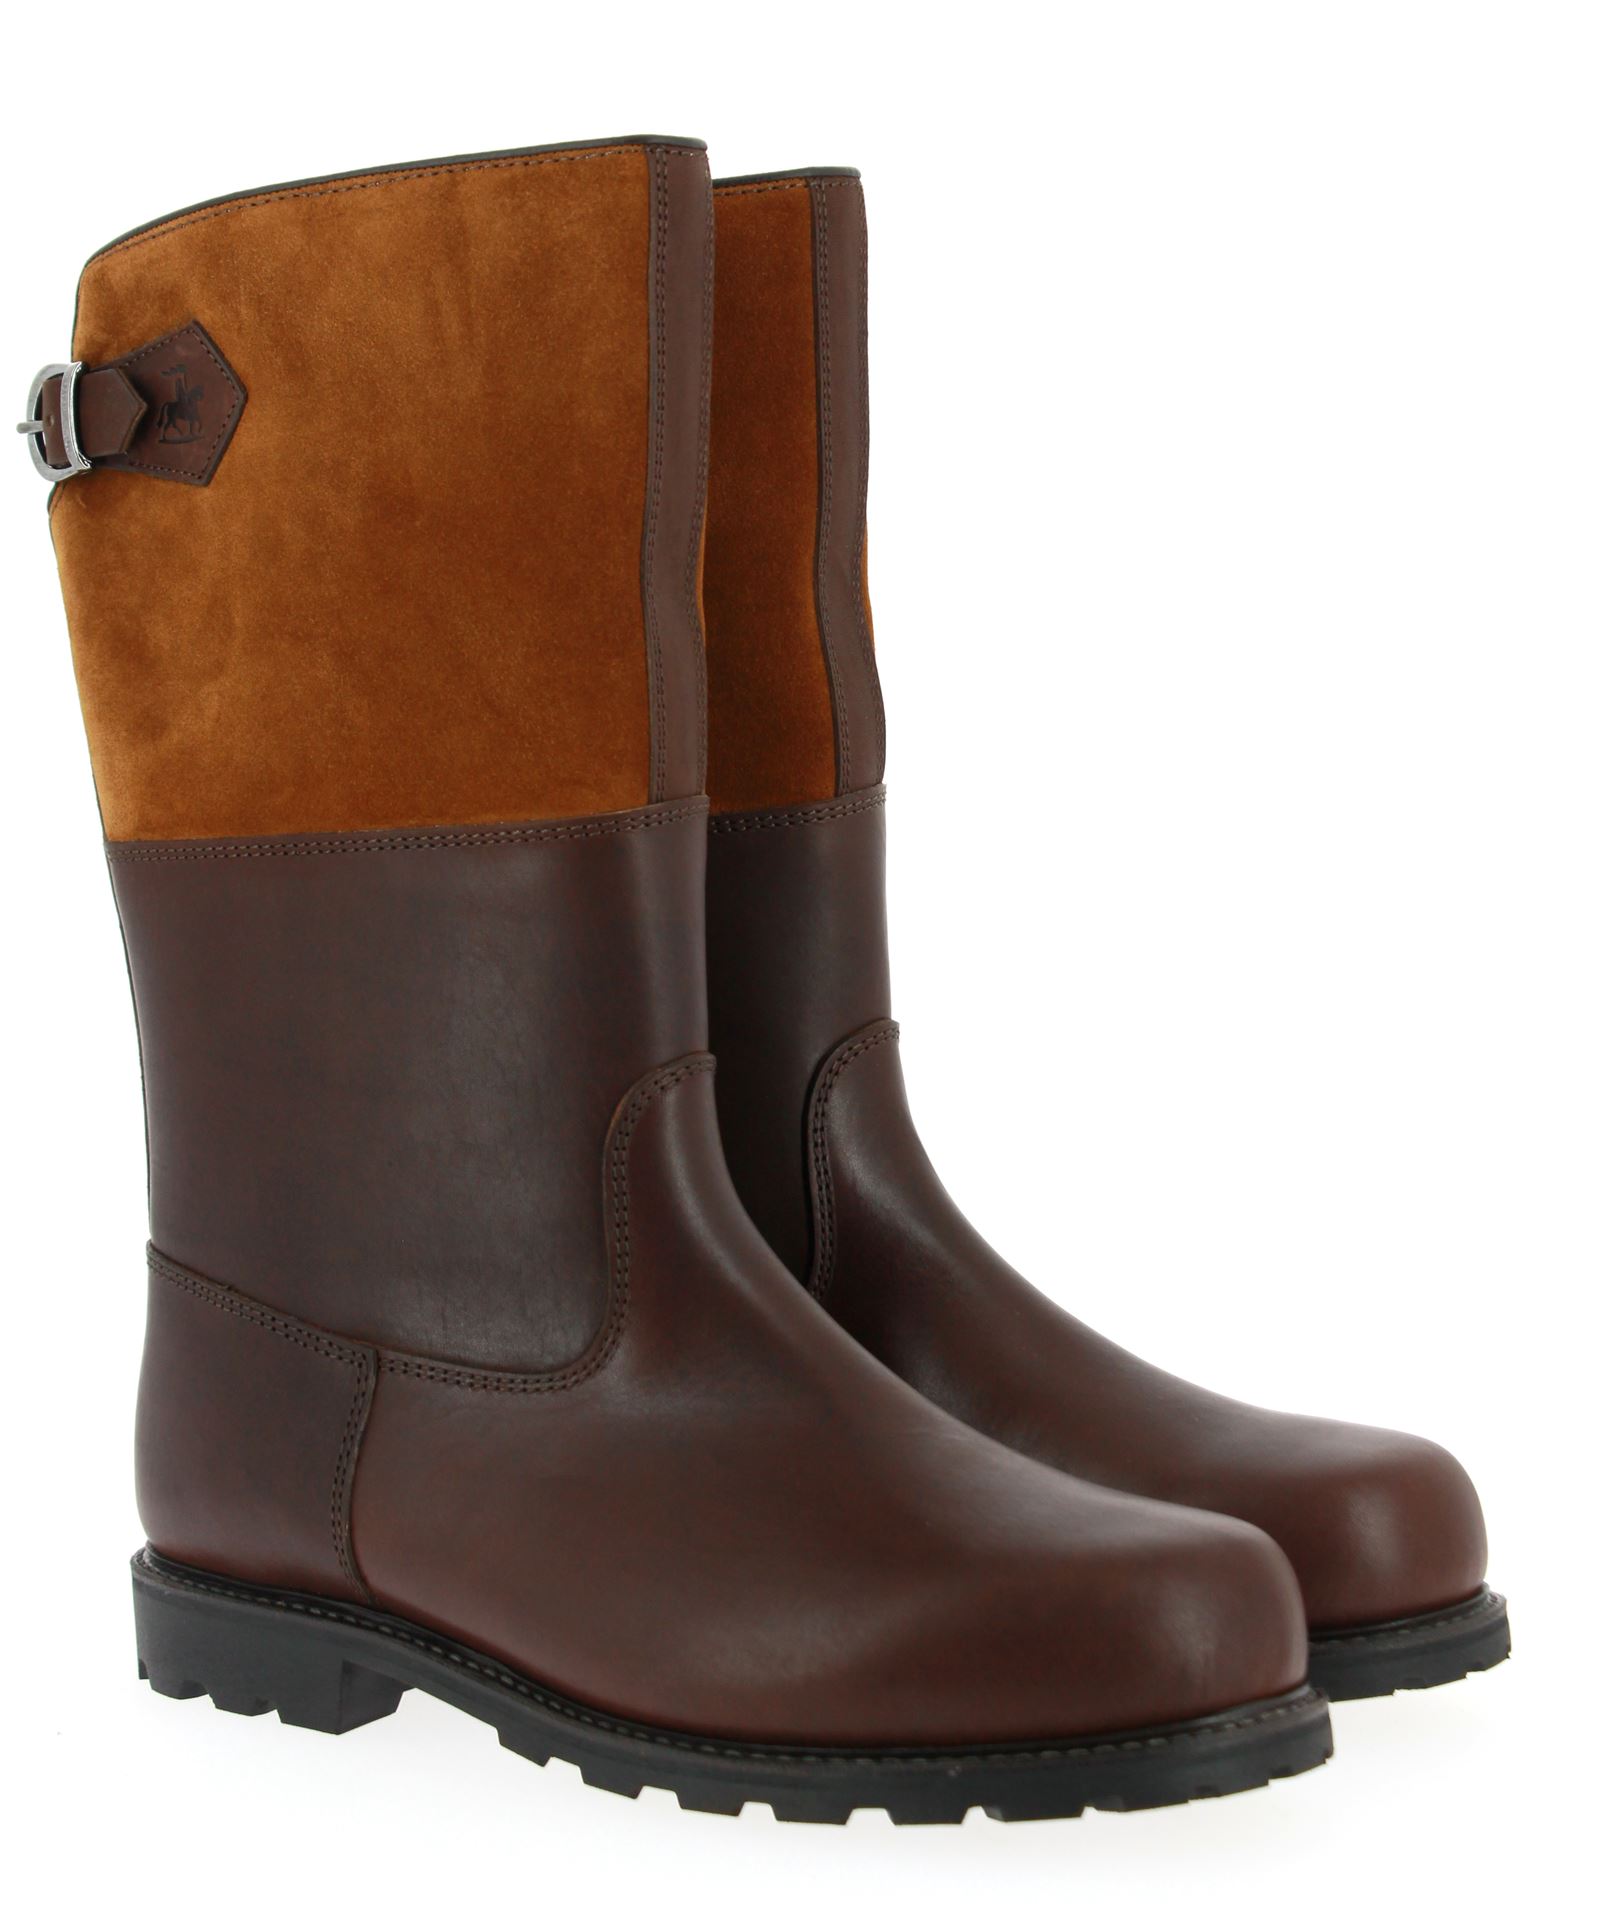 Ludwig Reiter Stiefel MARONIBRATER VELOURS COGNAC (43)